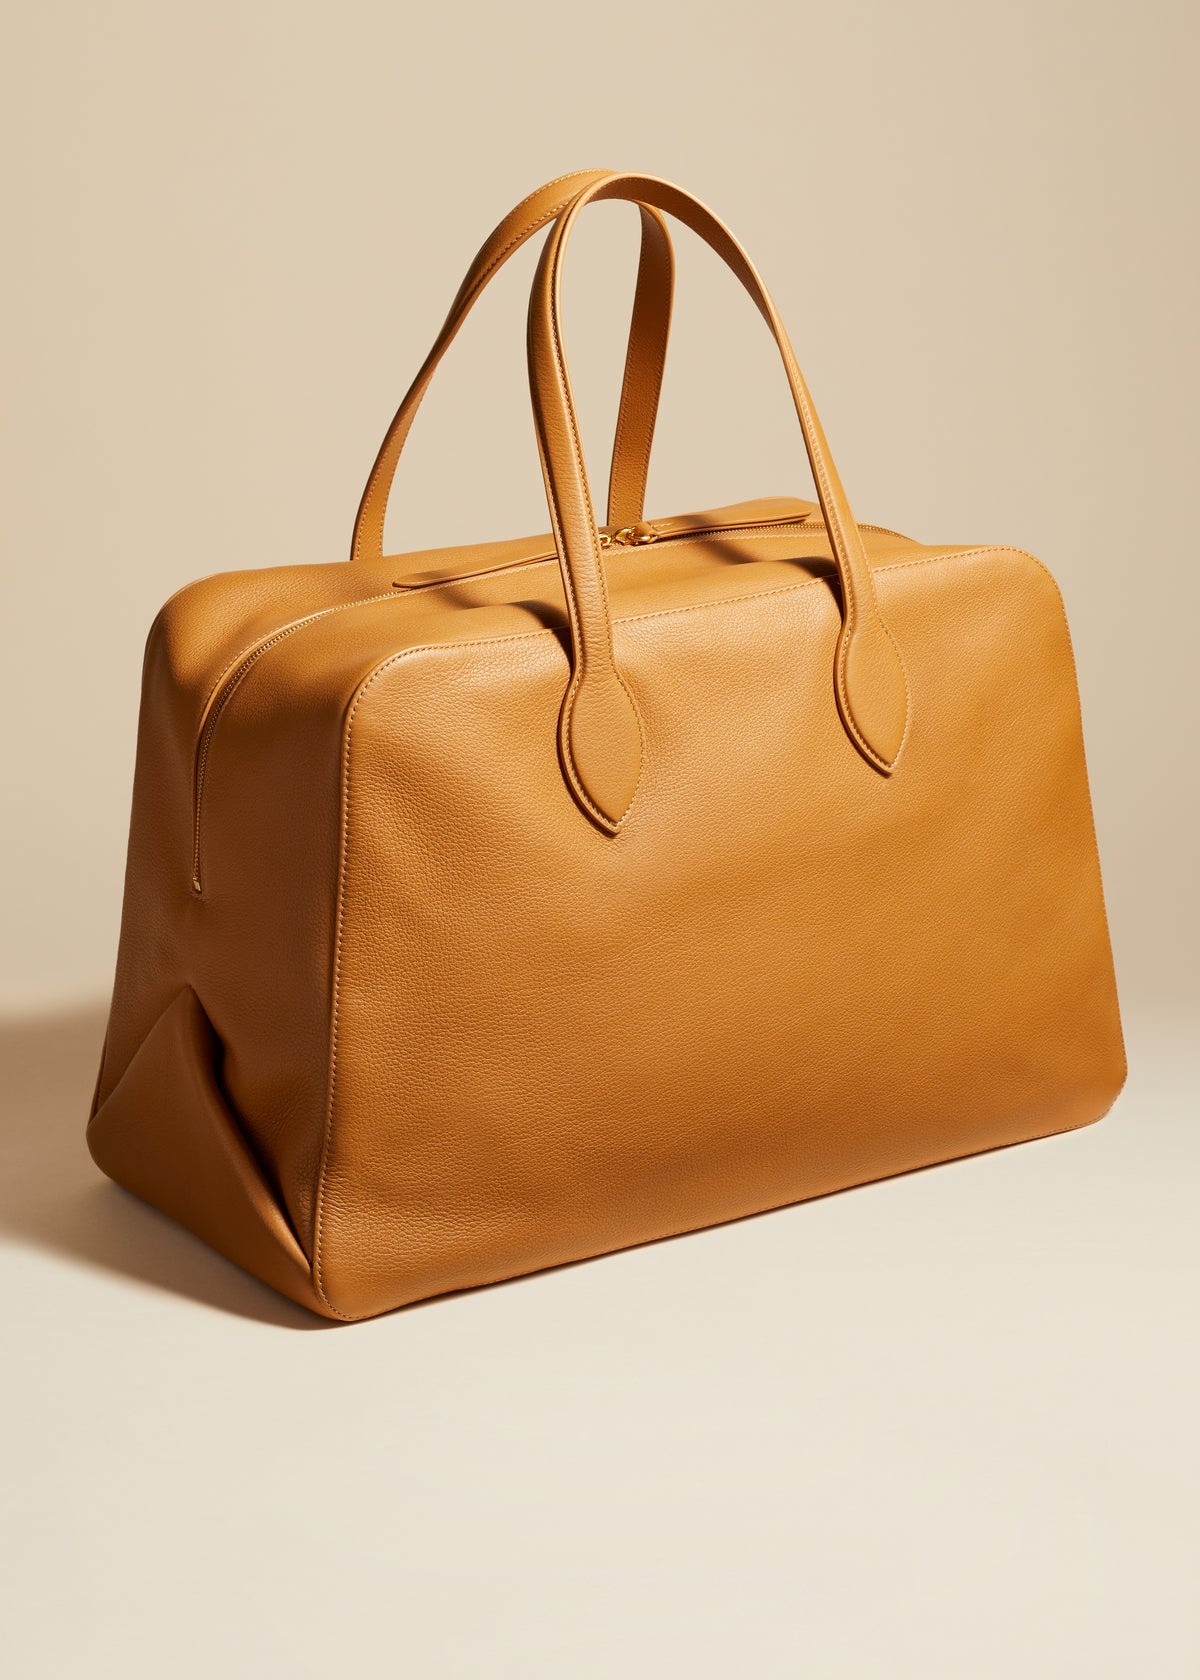 The Large Maeve Weekender Bag in Nougat Pebbled Leather - 2